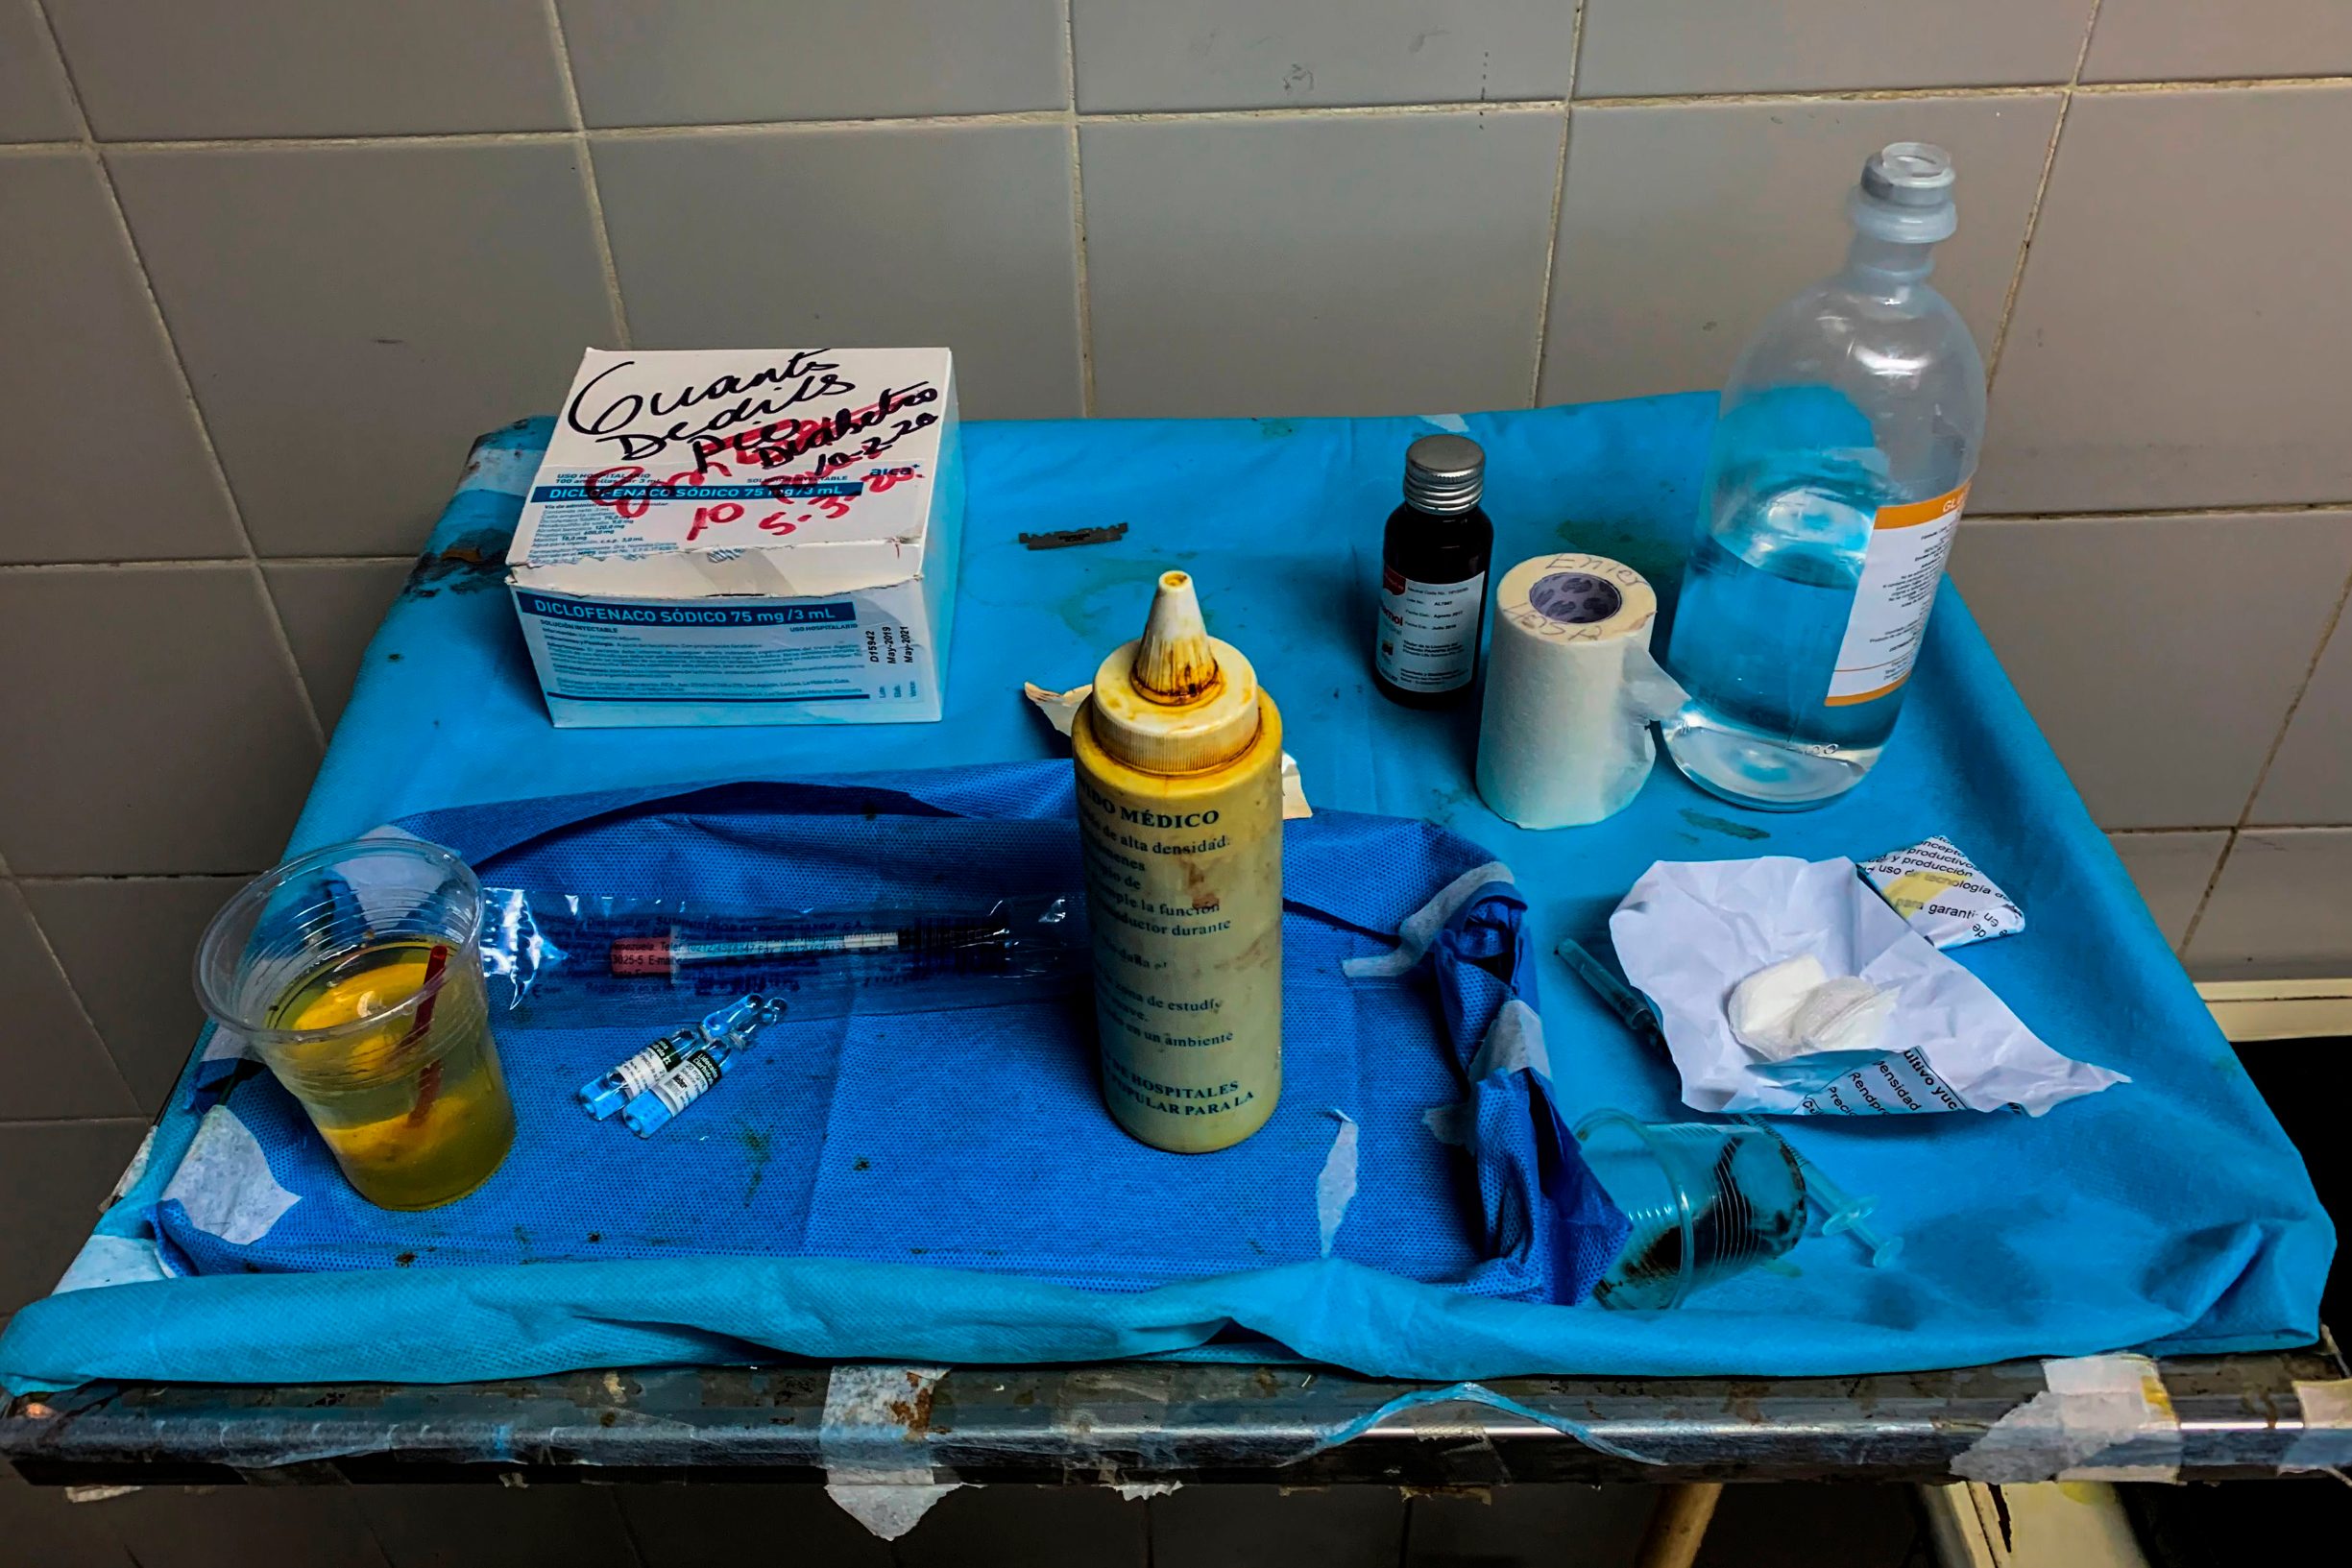 Deteriorated medical equipment is seen at the Guiria hospital, in Guiria, Venezuela, on March 14, 2020. - Human rights organizations recently warned Venezuela faced catastrophic consequences from the COVID-19 coronavirus pandemic which threatens to overwhelm its crumbling health system. (Photo by Federico PARRA / AFP)